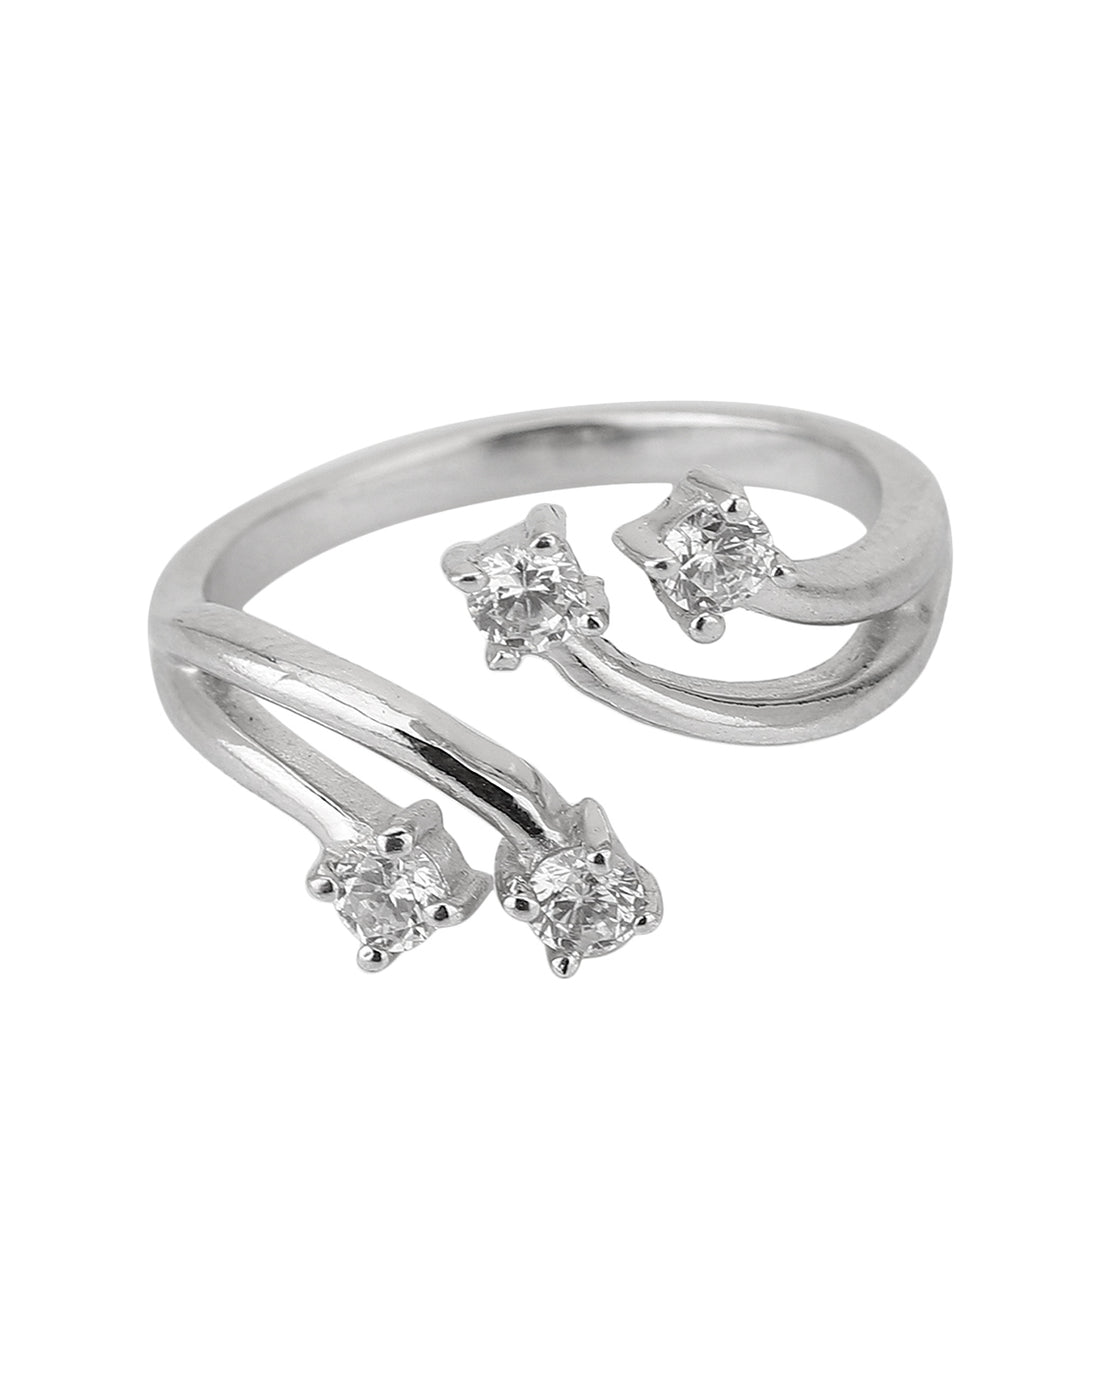 Carlton London Rhodium Plated Silver Toned Cz Studded Adjustable Contemporary Finger Ring For Women